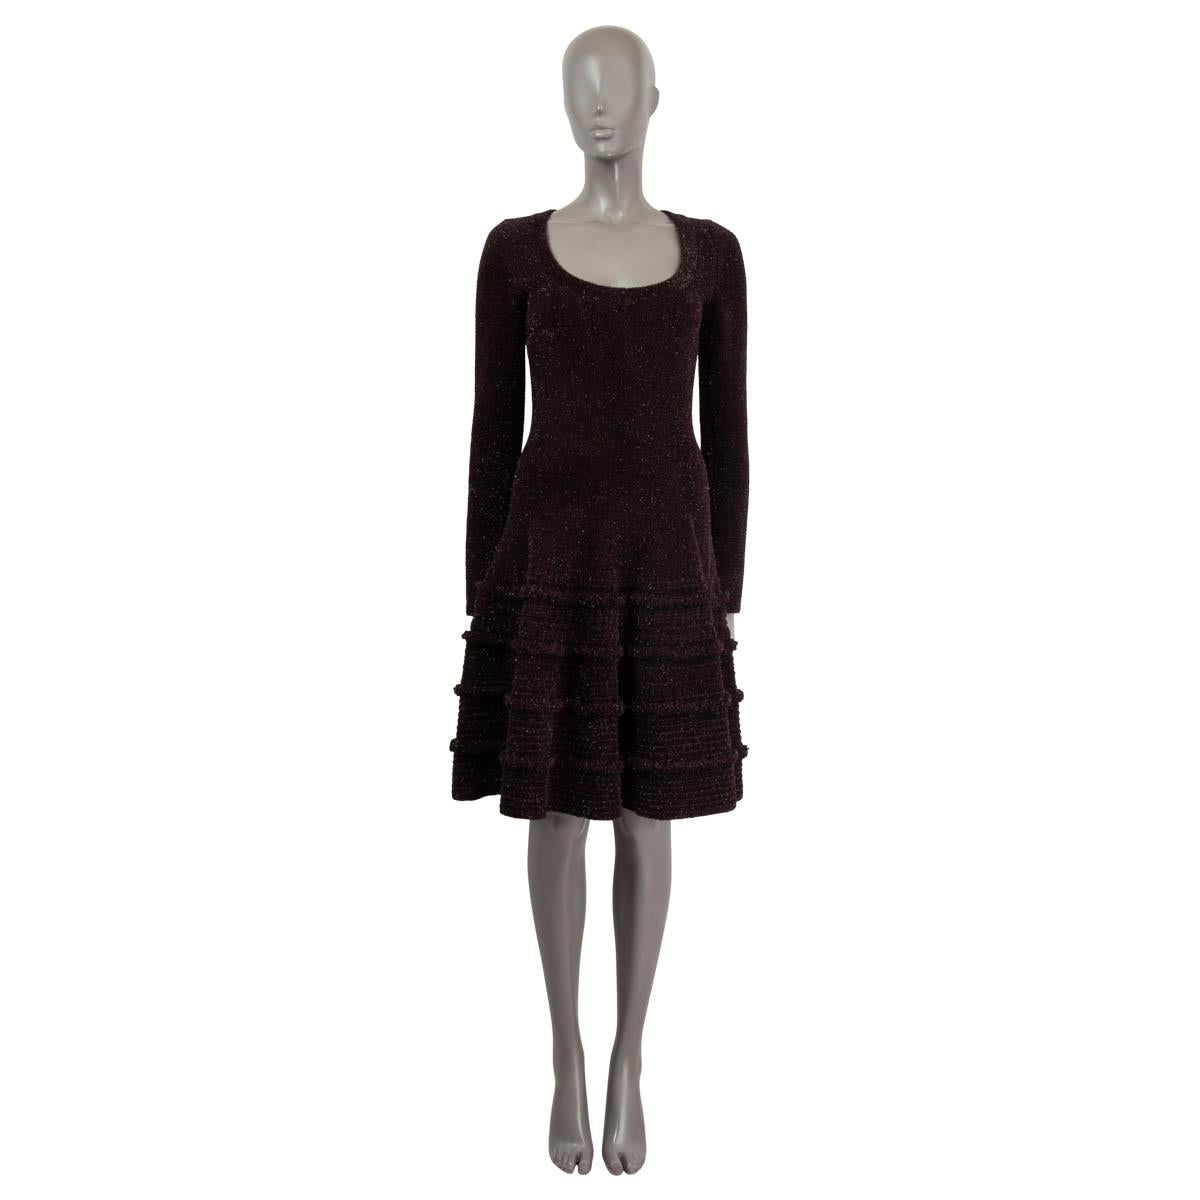 100% authentic Alaïa long-sleeve flared dress in brown wool (41%), nylon (28%) and viscose (25%). Features black lurex threads and ruffled hemline. Closes with invisible zipper on the back. Unlined. Has been worn and is in excellent condition.